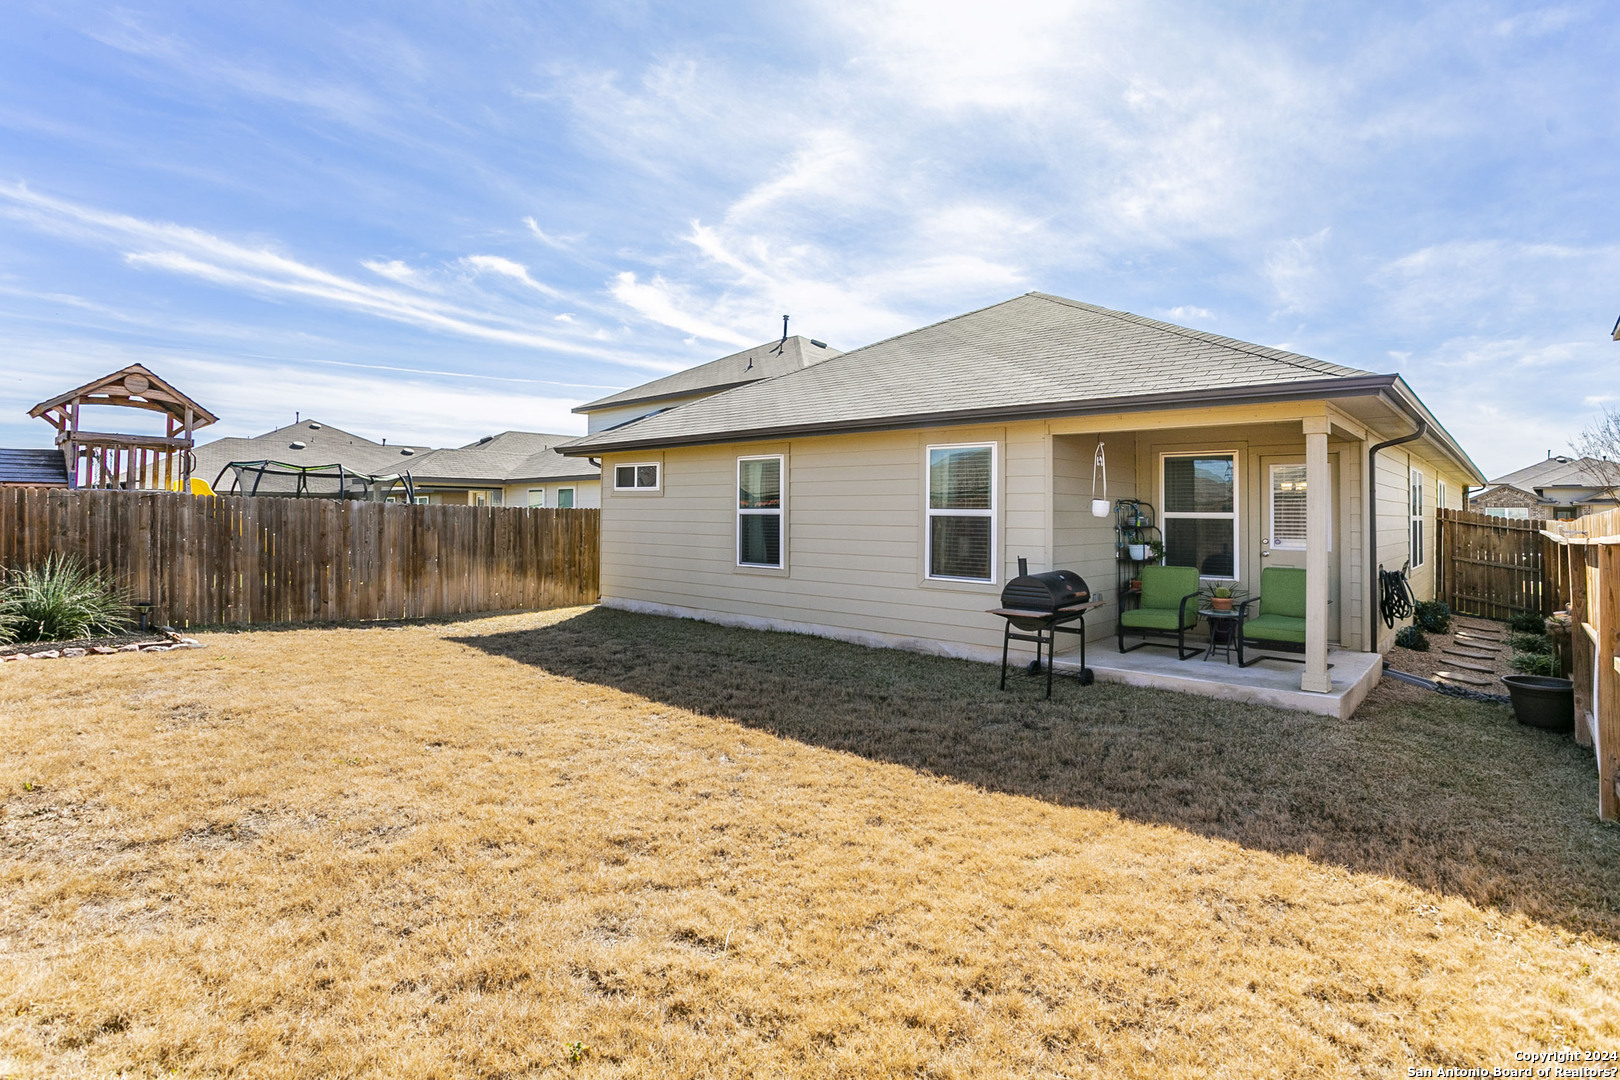 If you have additional questions regarding 13419 DROP SEED  in San Antonio or would like to tour the property with us call 800-660-1022 and reference MLS# 1750158.